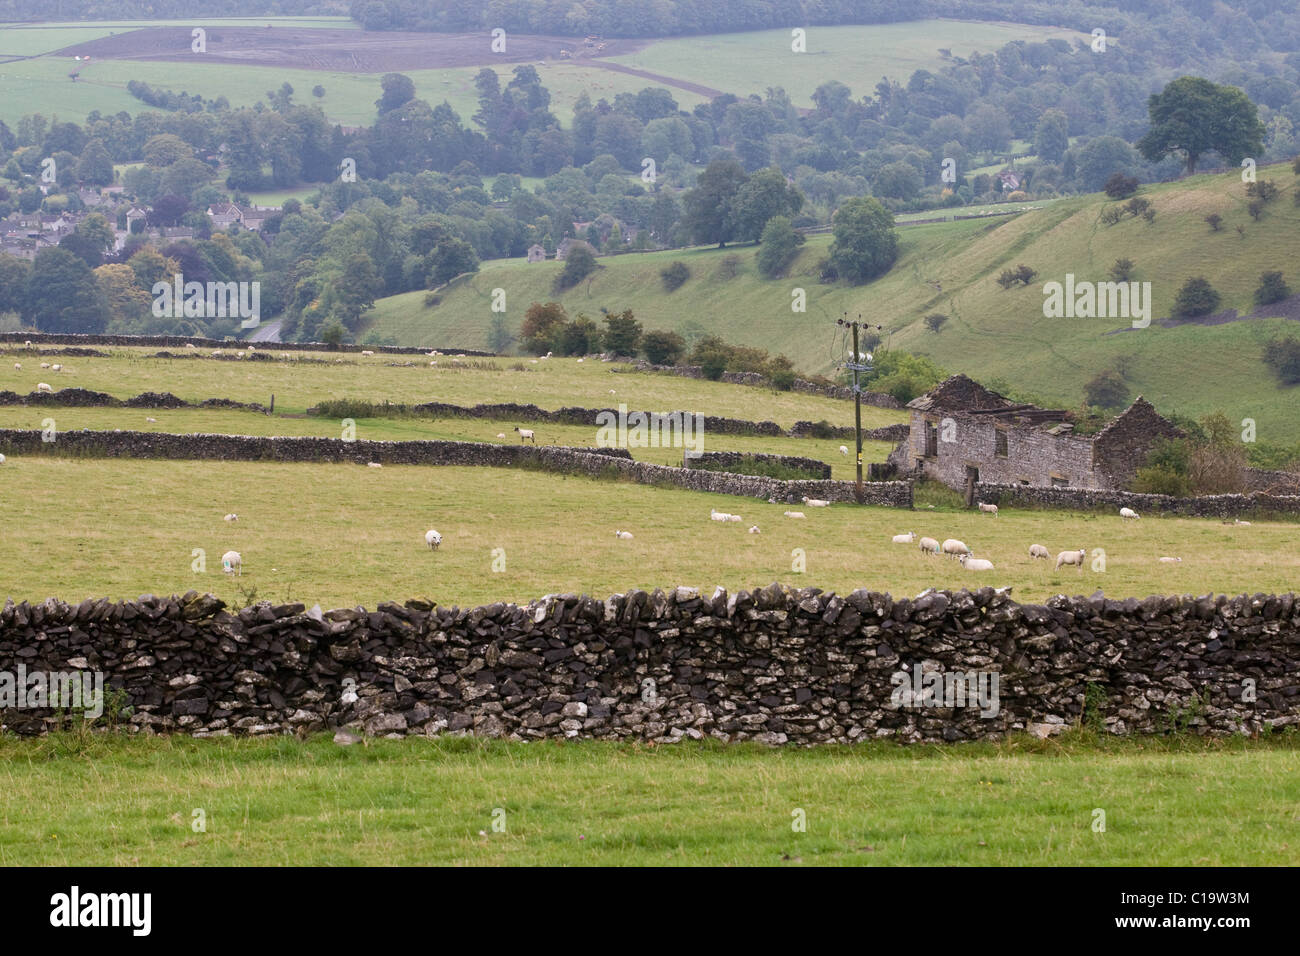 Sheep Grazing in a Derbyshire Landscape Stock Photo